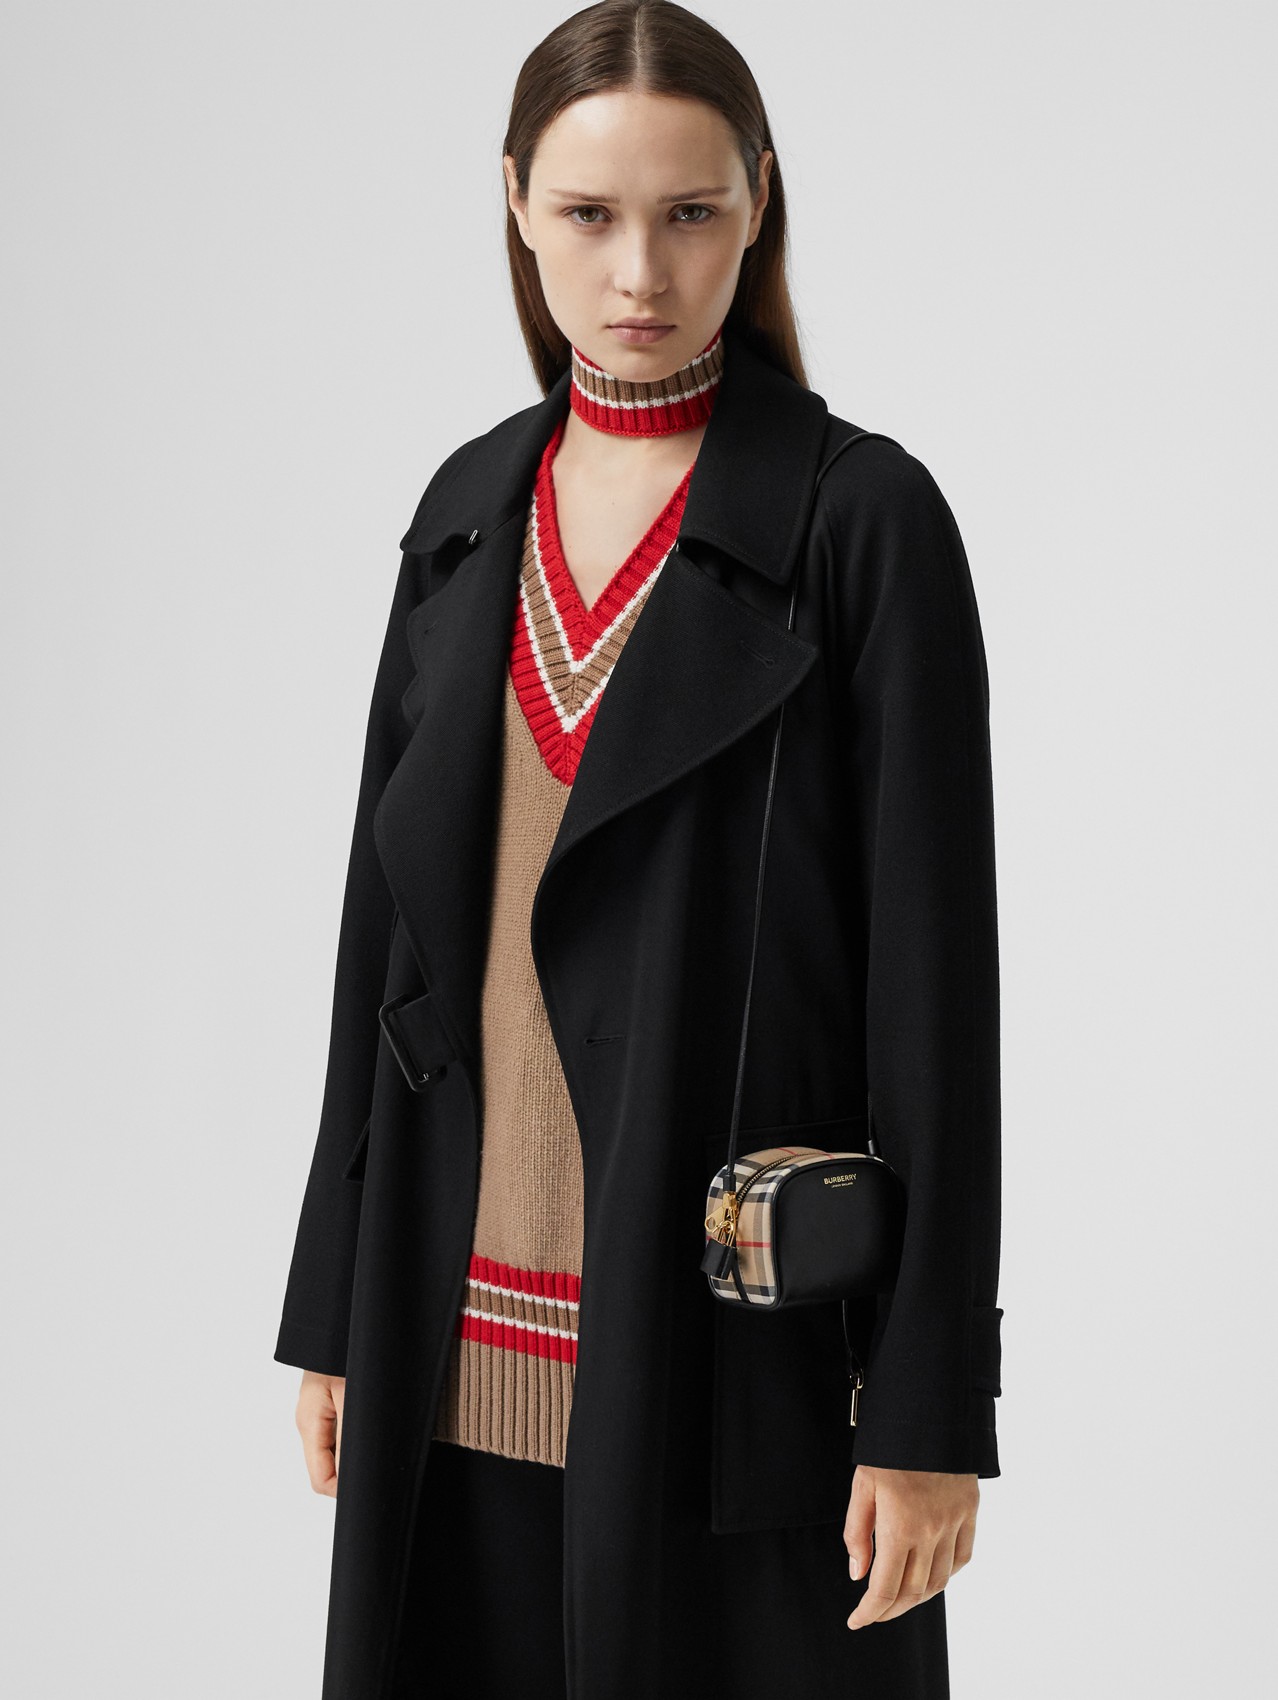 Accessories for Women | Burberry United Kingdom